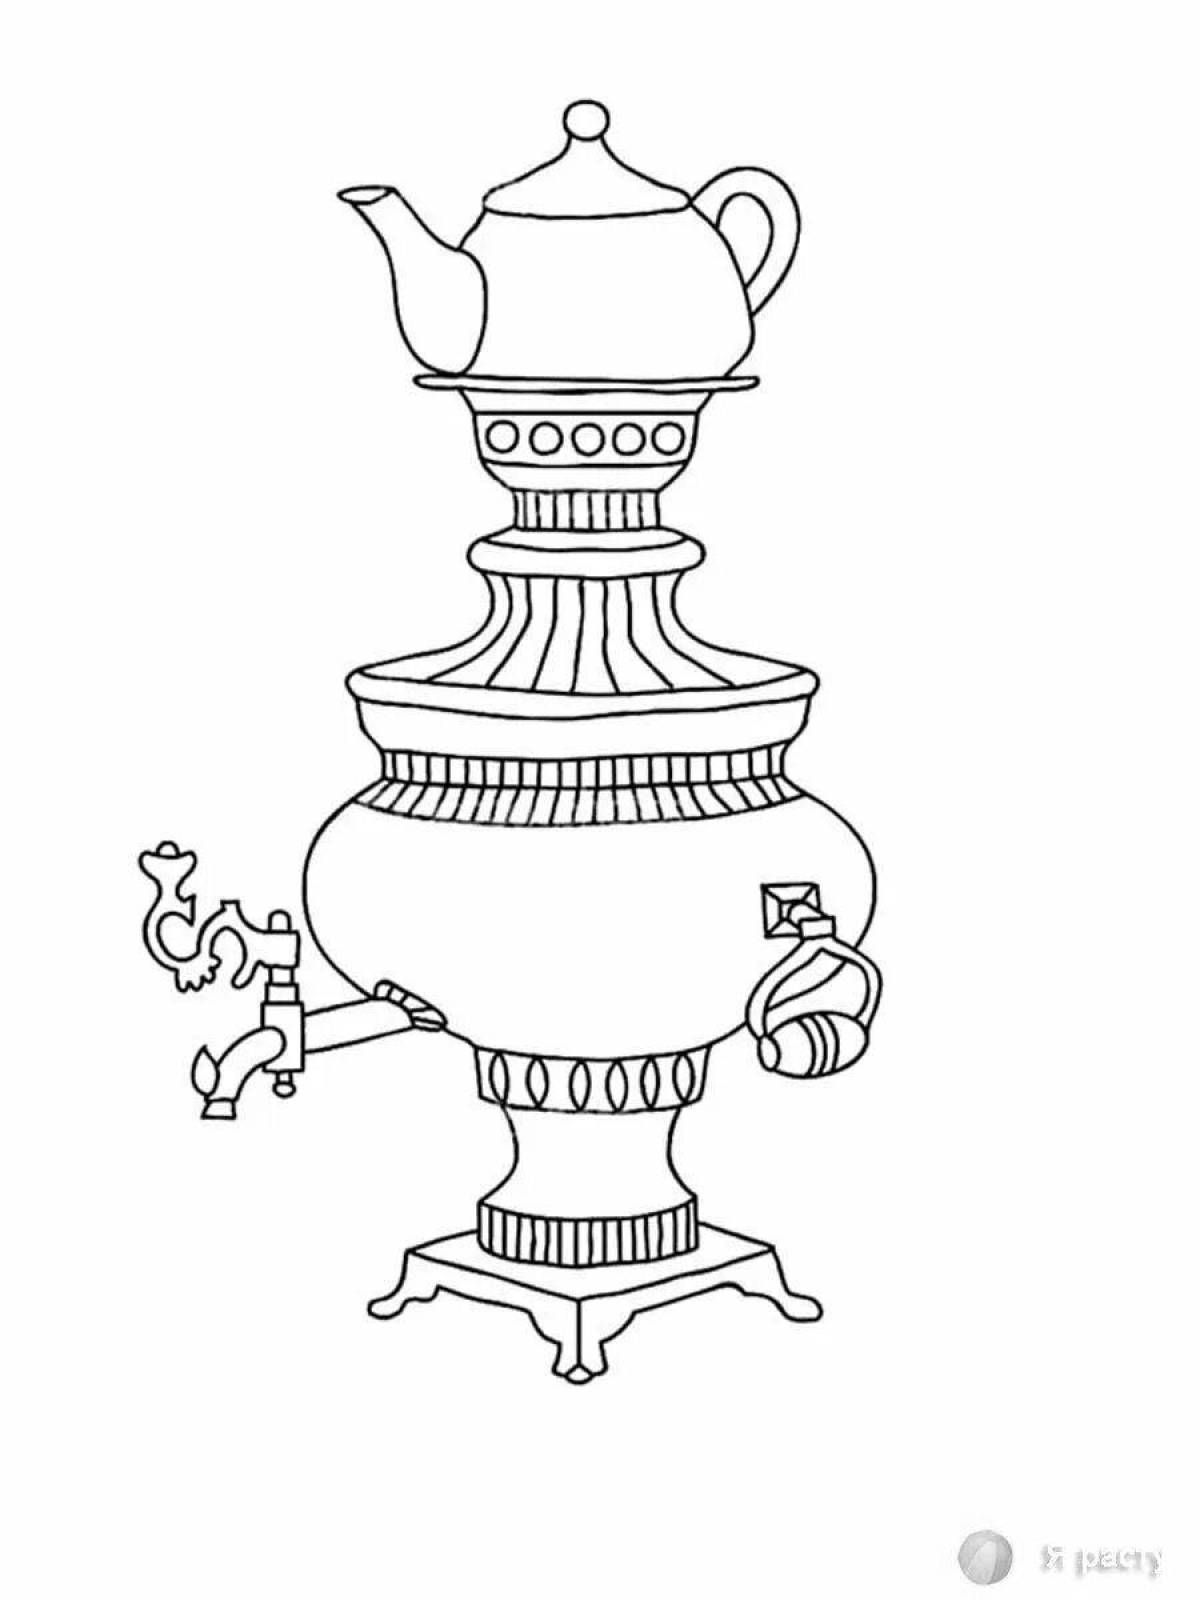 Magic drawing of a samovar for children